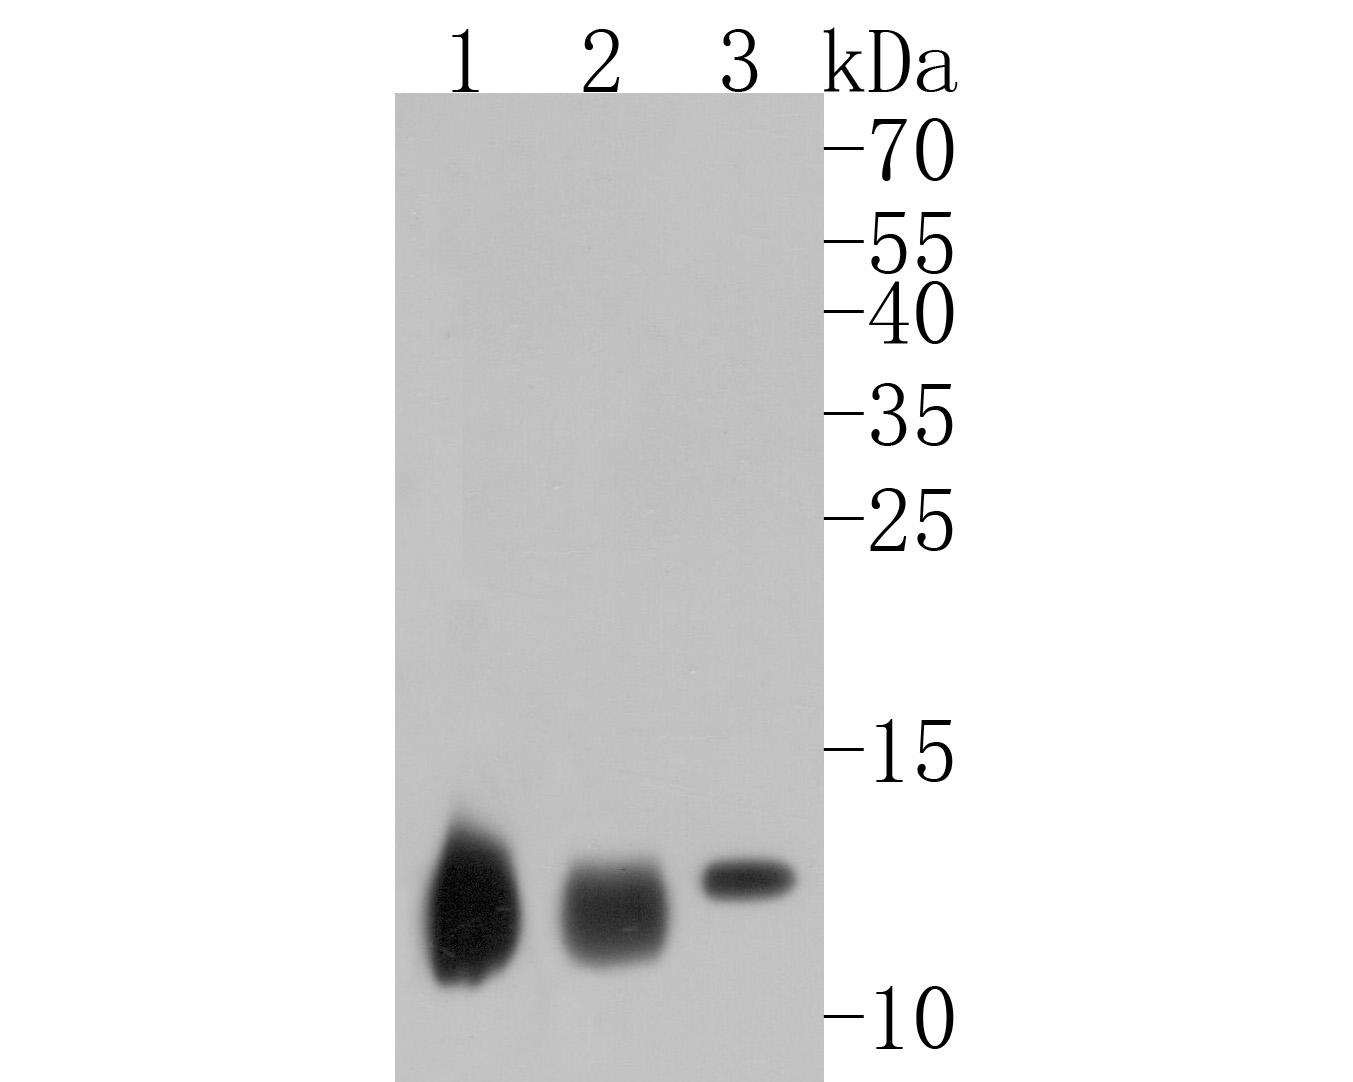 Western blot analysis of Hemoglobin subunit alpha on different lysates. Proteins were transferred to a PVDF membrane and blocked with 5% BSA in PBS for 1 hour at room temperature. The primary antibody (ET1611-81, 1/500) was used in 5% BSA at room temperature for 2 hours. Goat Anti-Rabbit IgG - HRP Secondary Antibody (HA1001) at 1:5,000 dilution was used for 1 hour at room temperature.<br />
<br />
Positive control: <br />
Lane 1: human heart tissue lysate<br />
Lane 2: human spleen tissue lysate<br />
Lane 3: rat heart tissue lysate<br />
<br />
Predicted band size: 15 kDa<br />
Observed band size: 13 kDa